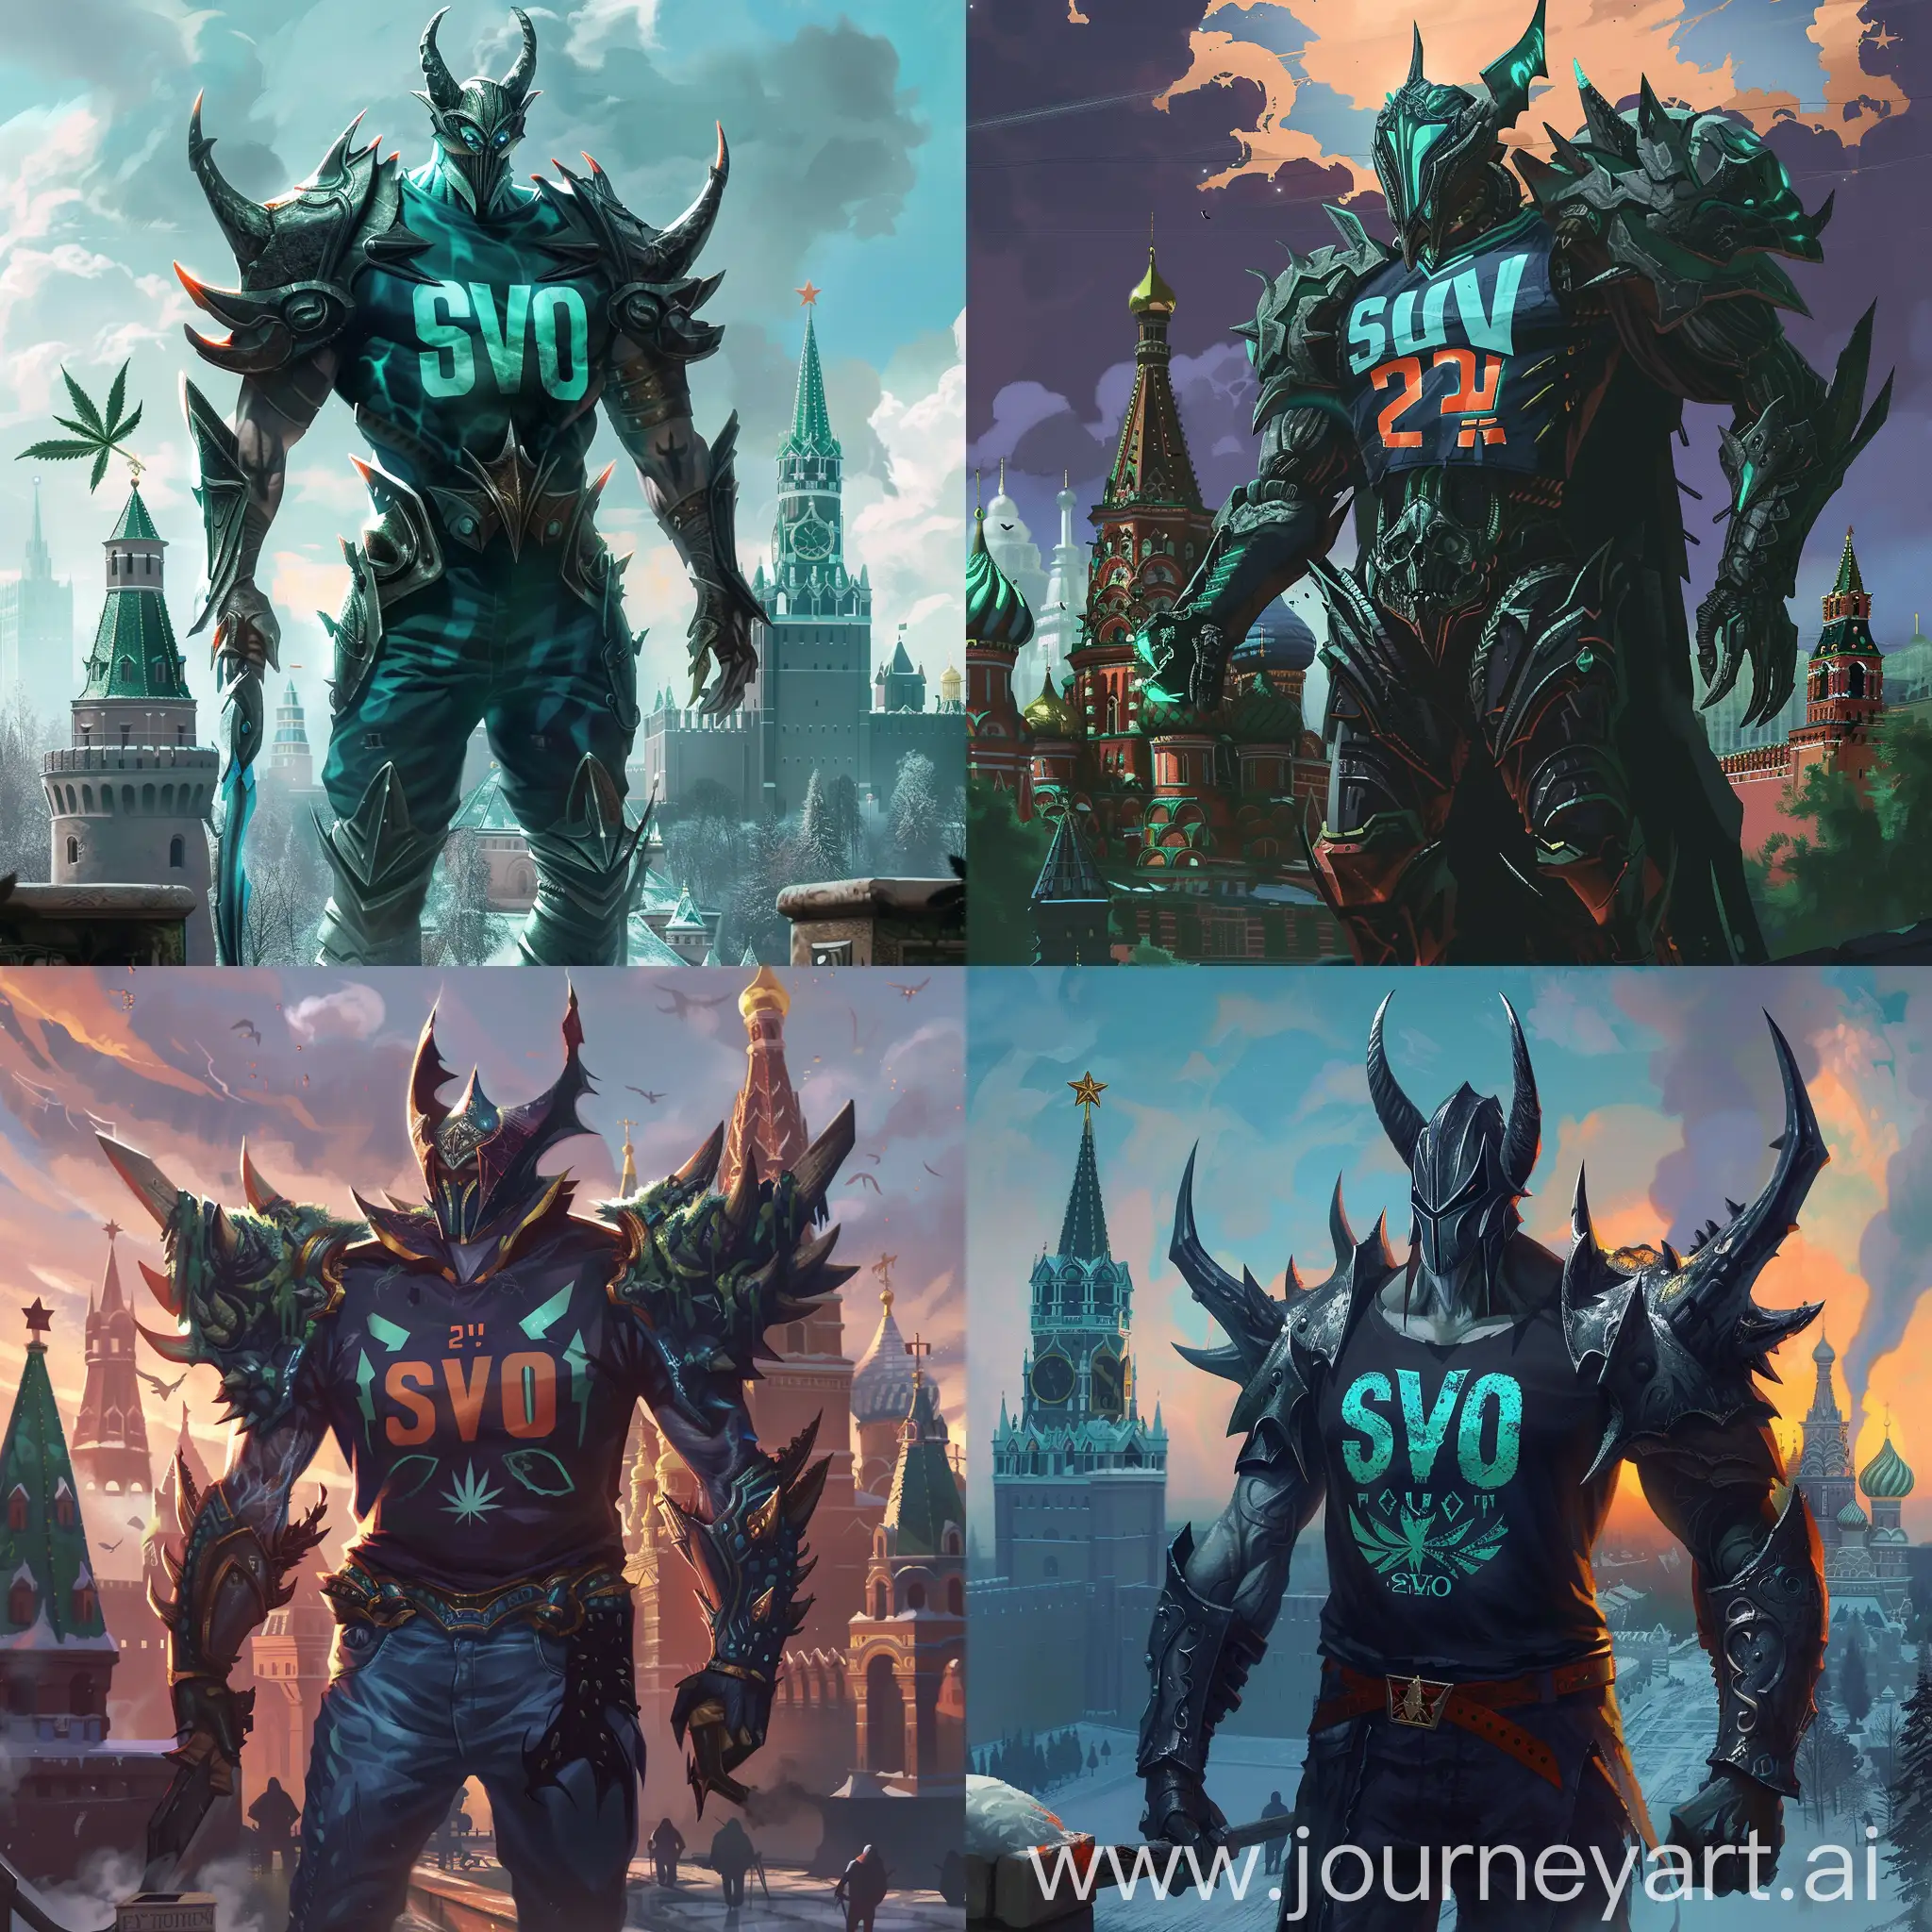 wraith king from dota  stands against the background of the Kremlin with a T-shirt that says 2/20 and SVO